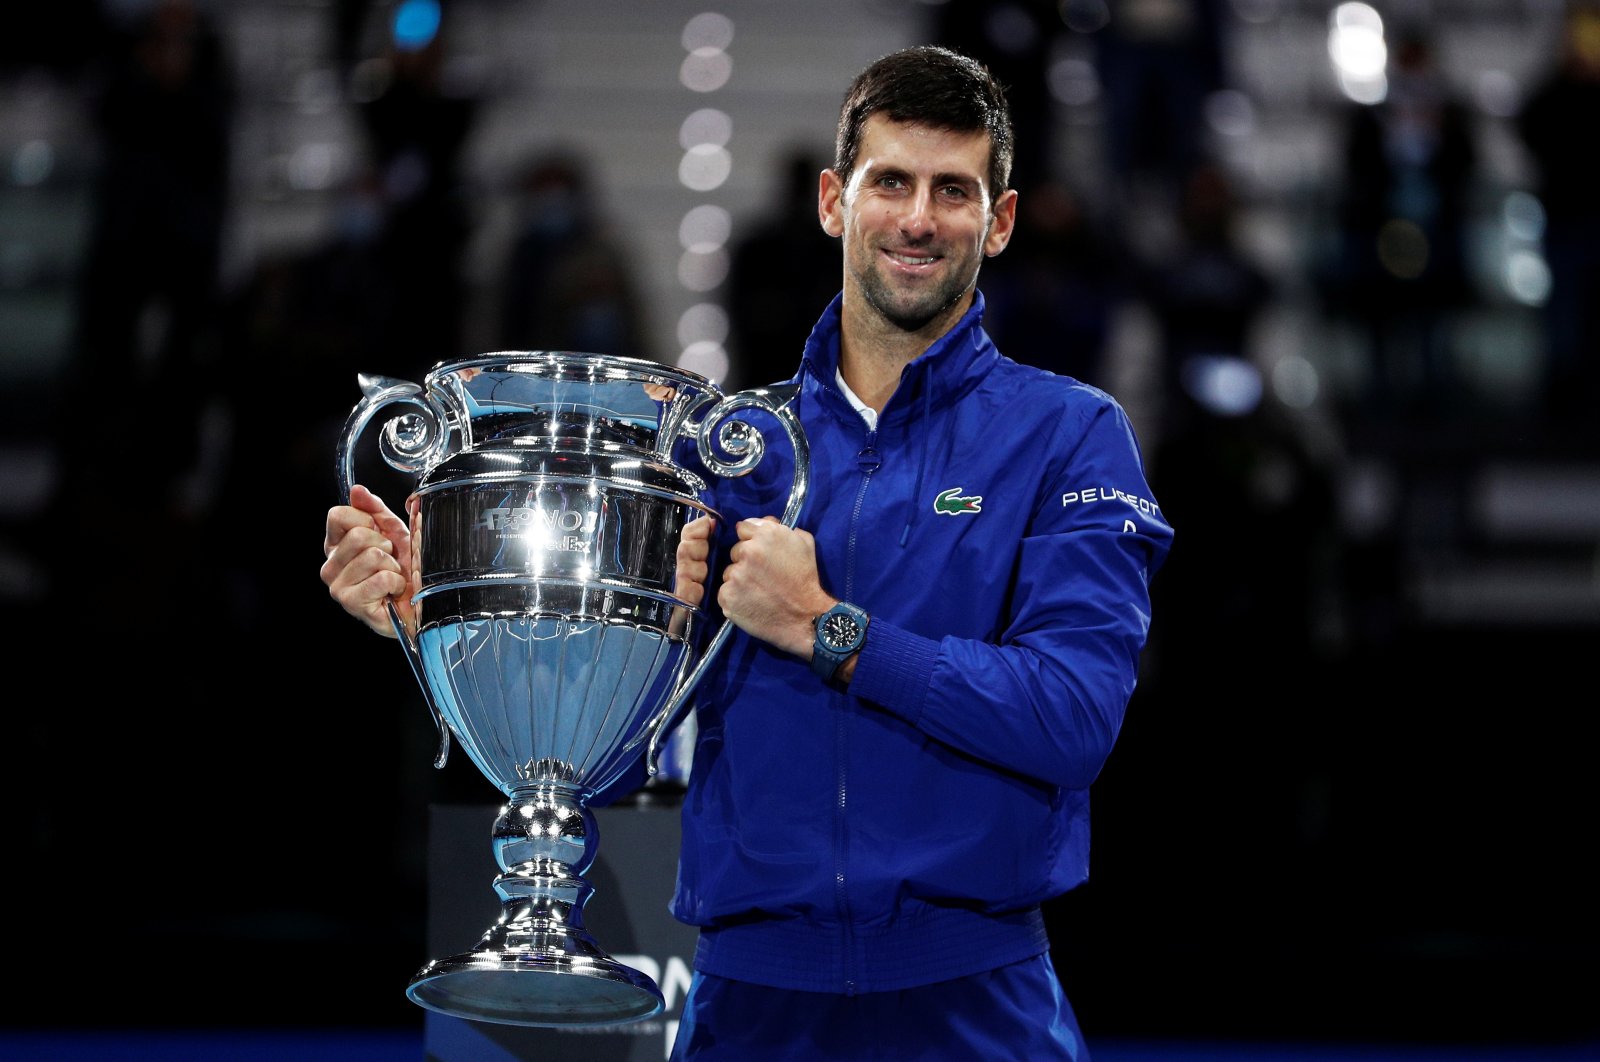 Serbia&#039;s Novak Djokovic poses as he celebrates with the trophy for his 2021 world number one ranking after winning his group stage match against Norway&#039;s Casper Ruud at the ATP Finals in Turin, Italy, Nov. 15, 2021. (Reuters Photo)